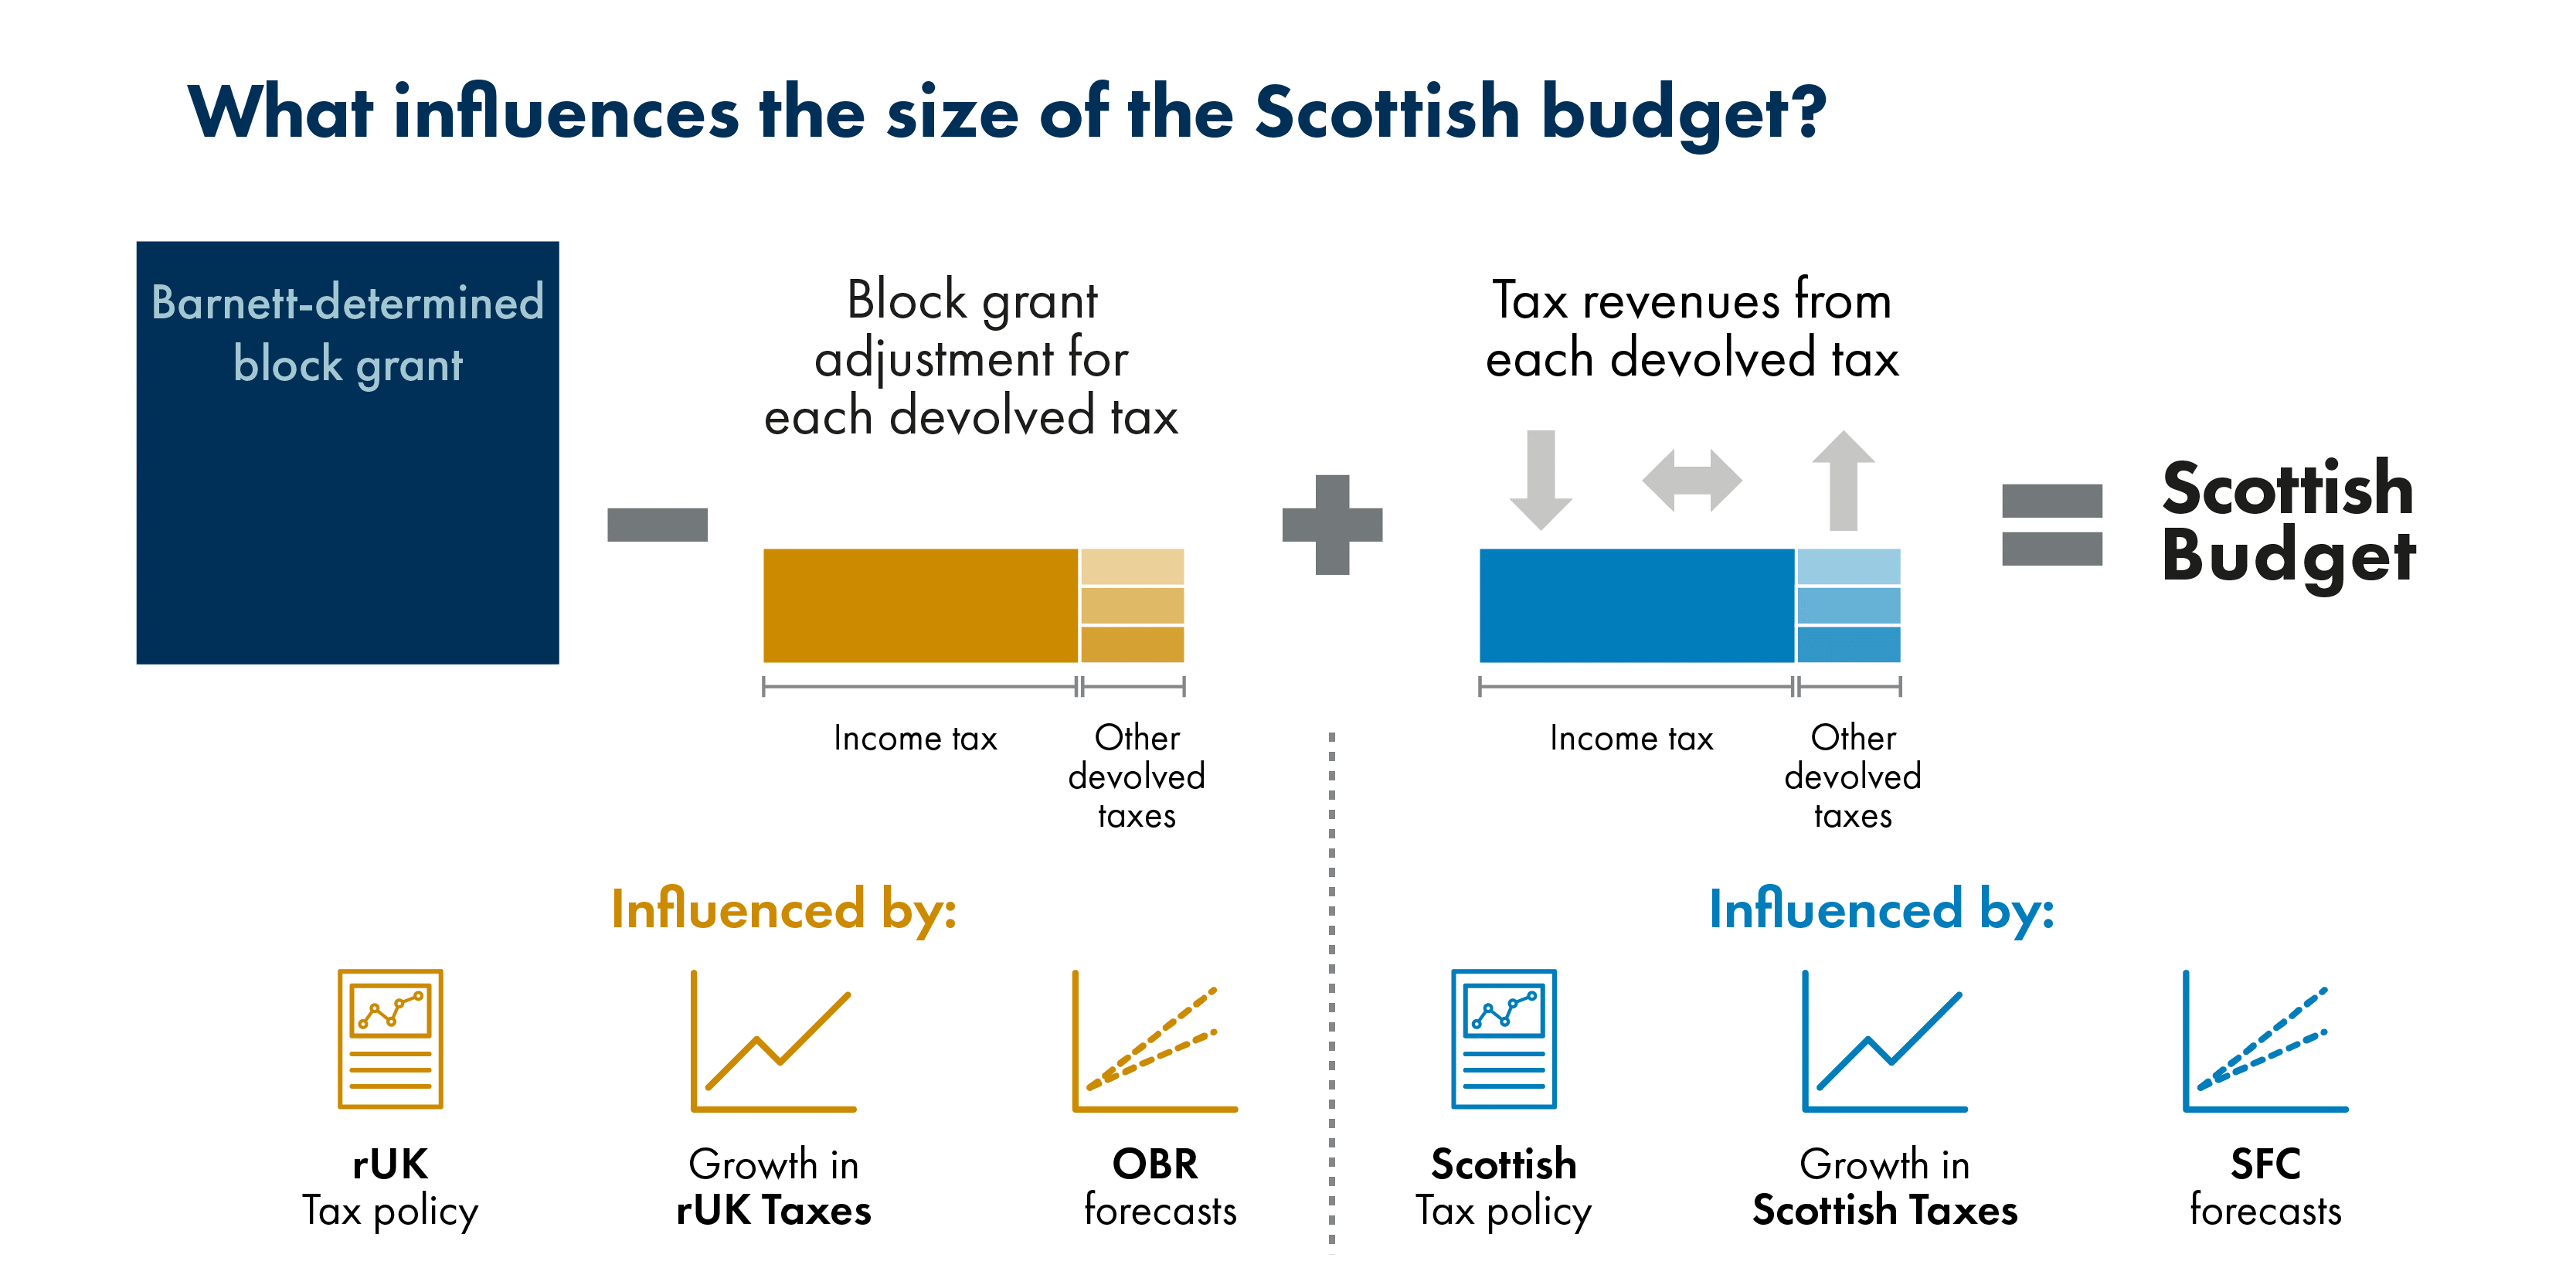 Figure 1 describes what influences the size of the Scottish Budget. Rest of the UK tax policy, growth in Rest of the UK taxes and OBR forecasts influences the block grant adjustment while Scottish tax policy, growth in Scottish taxes and Scottish Fiscal Commission forecasts influence the Tax revenues from each devolved tax.